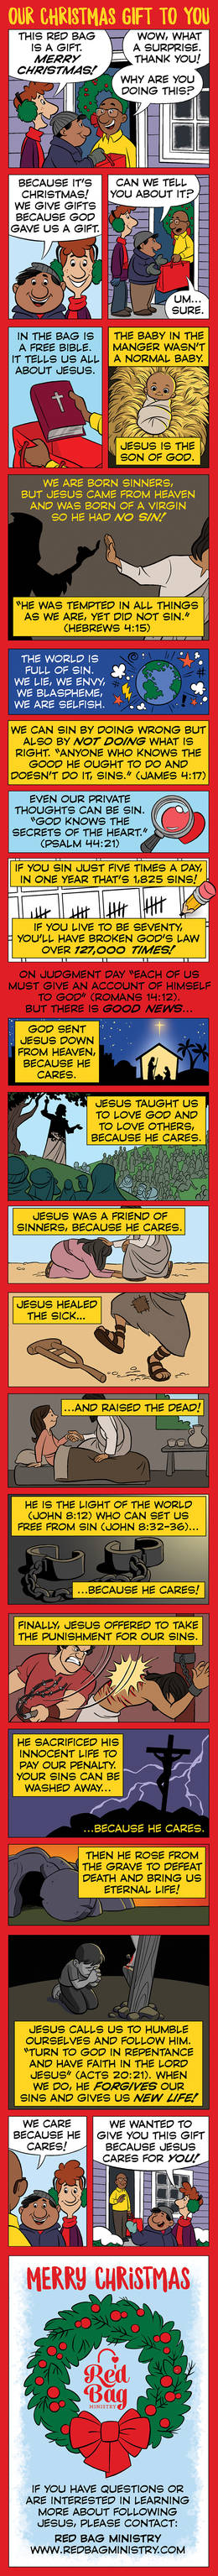 Mini-Comic for Red Bag Ministry